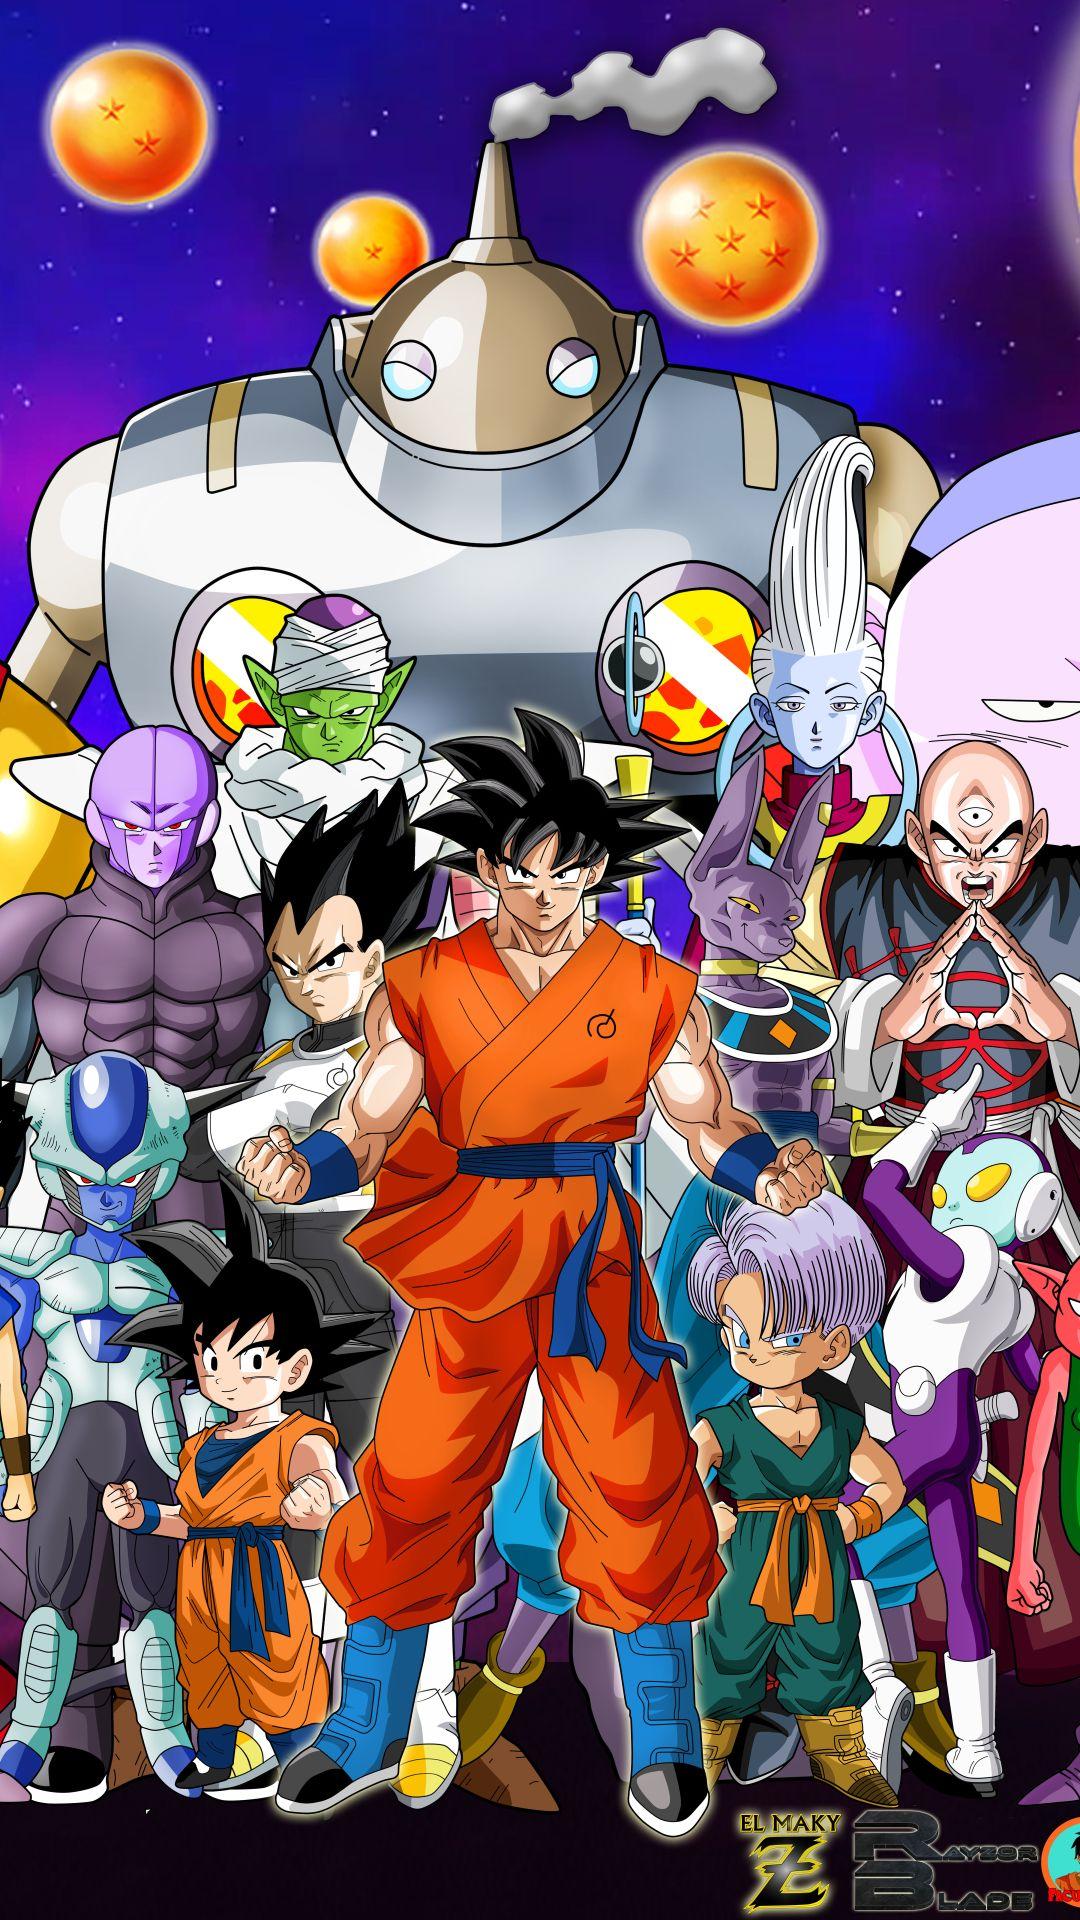 Dragon Ball Z Iphone Wallpapers Top Free Dragon Ball Z Iphone Backgrounds Wallpaperaccess